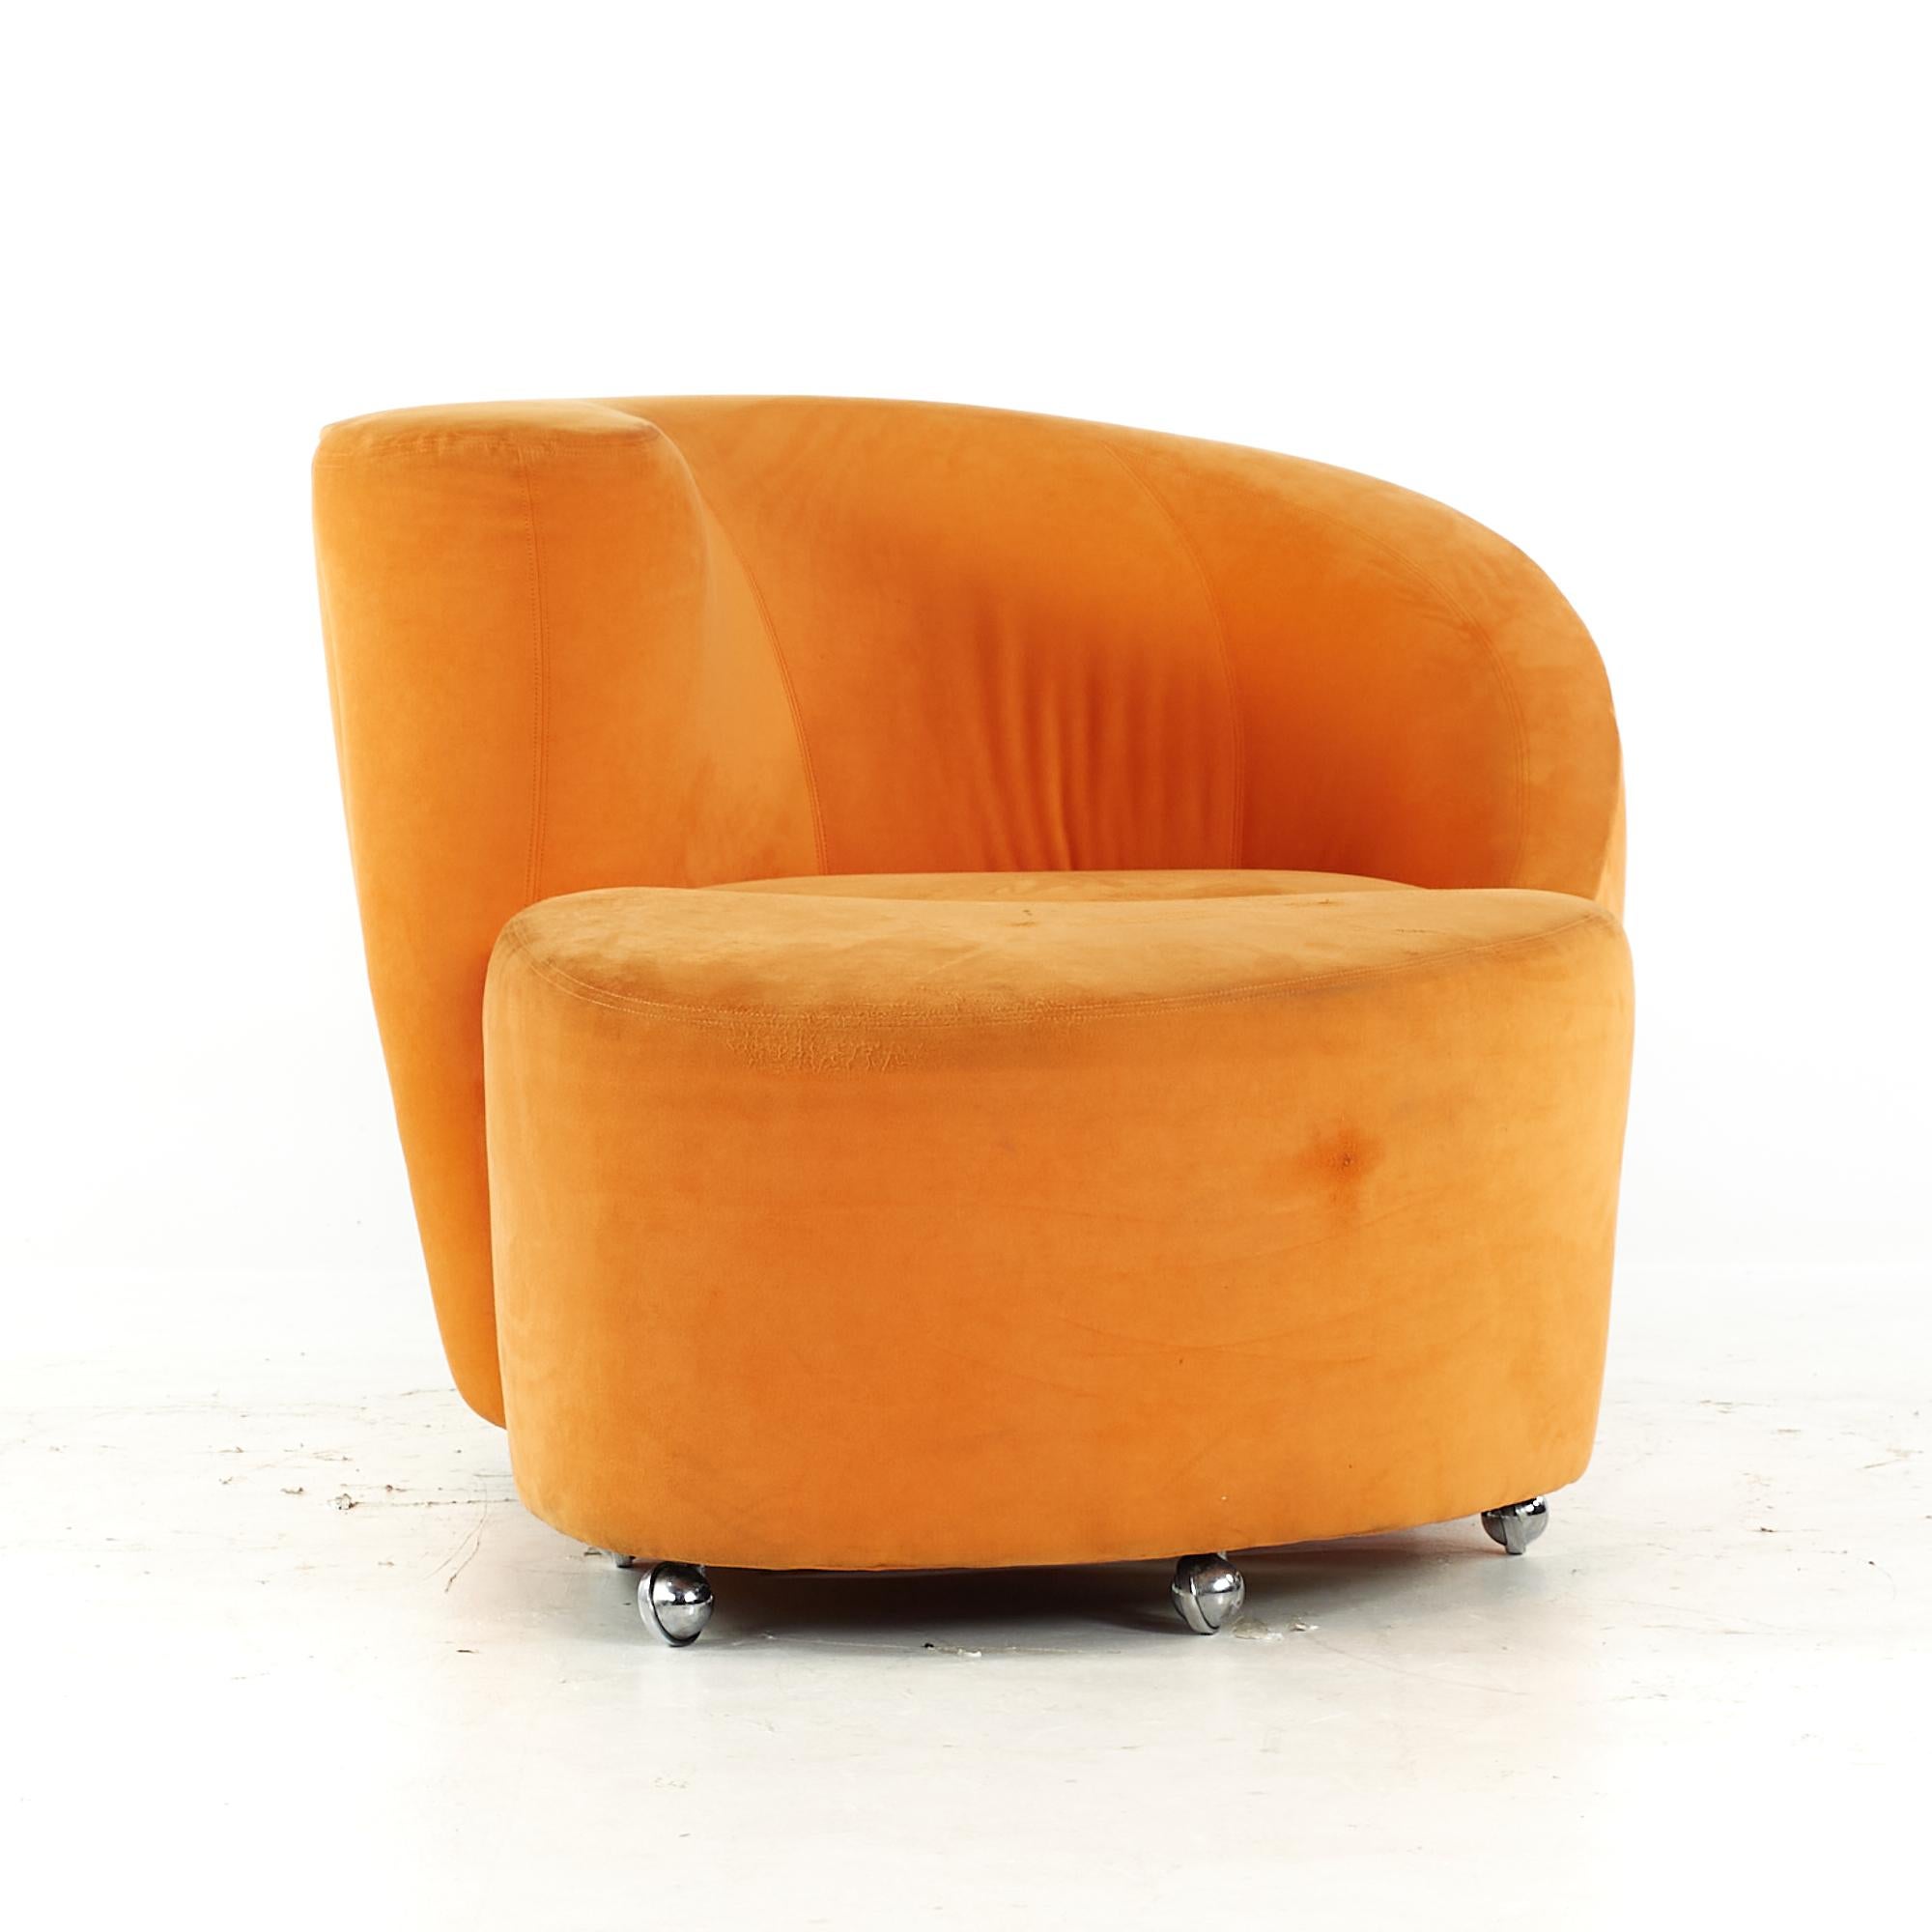 Kagan for Directional Midcentury Lounge Chairs with Ottoman, Pair In Good Condition For Sale In Countryside, IL